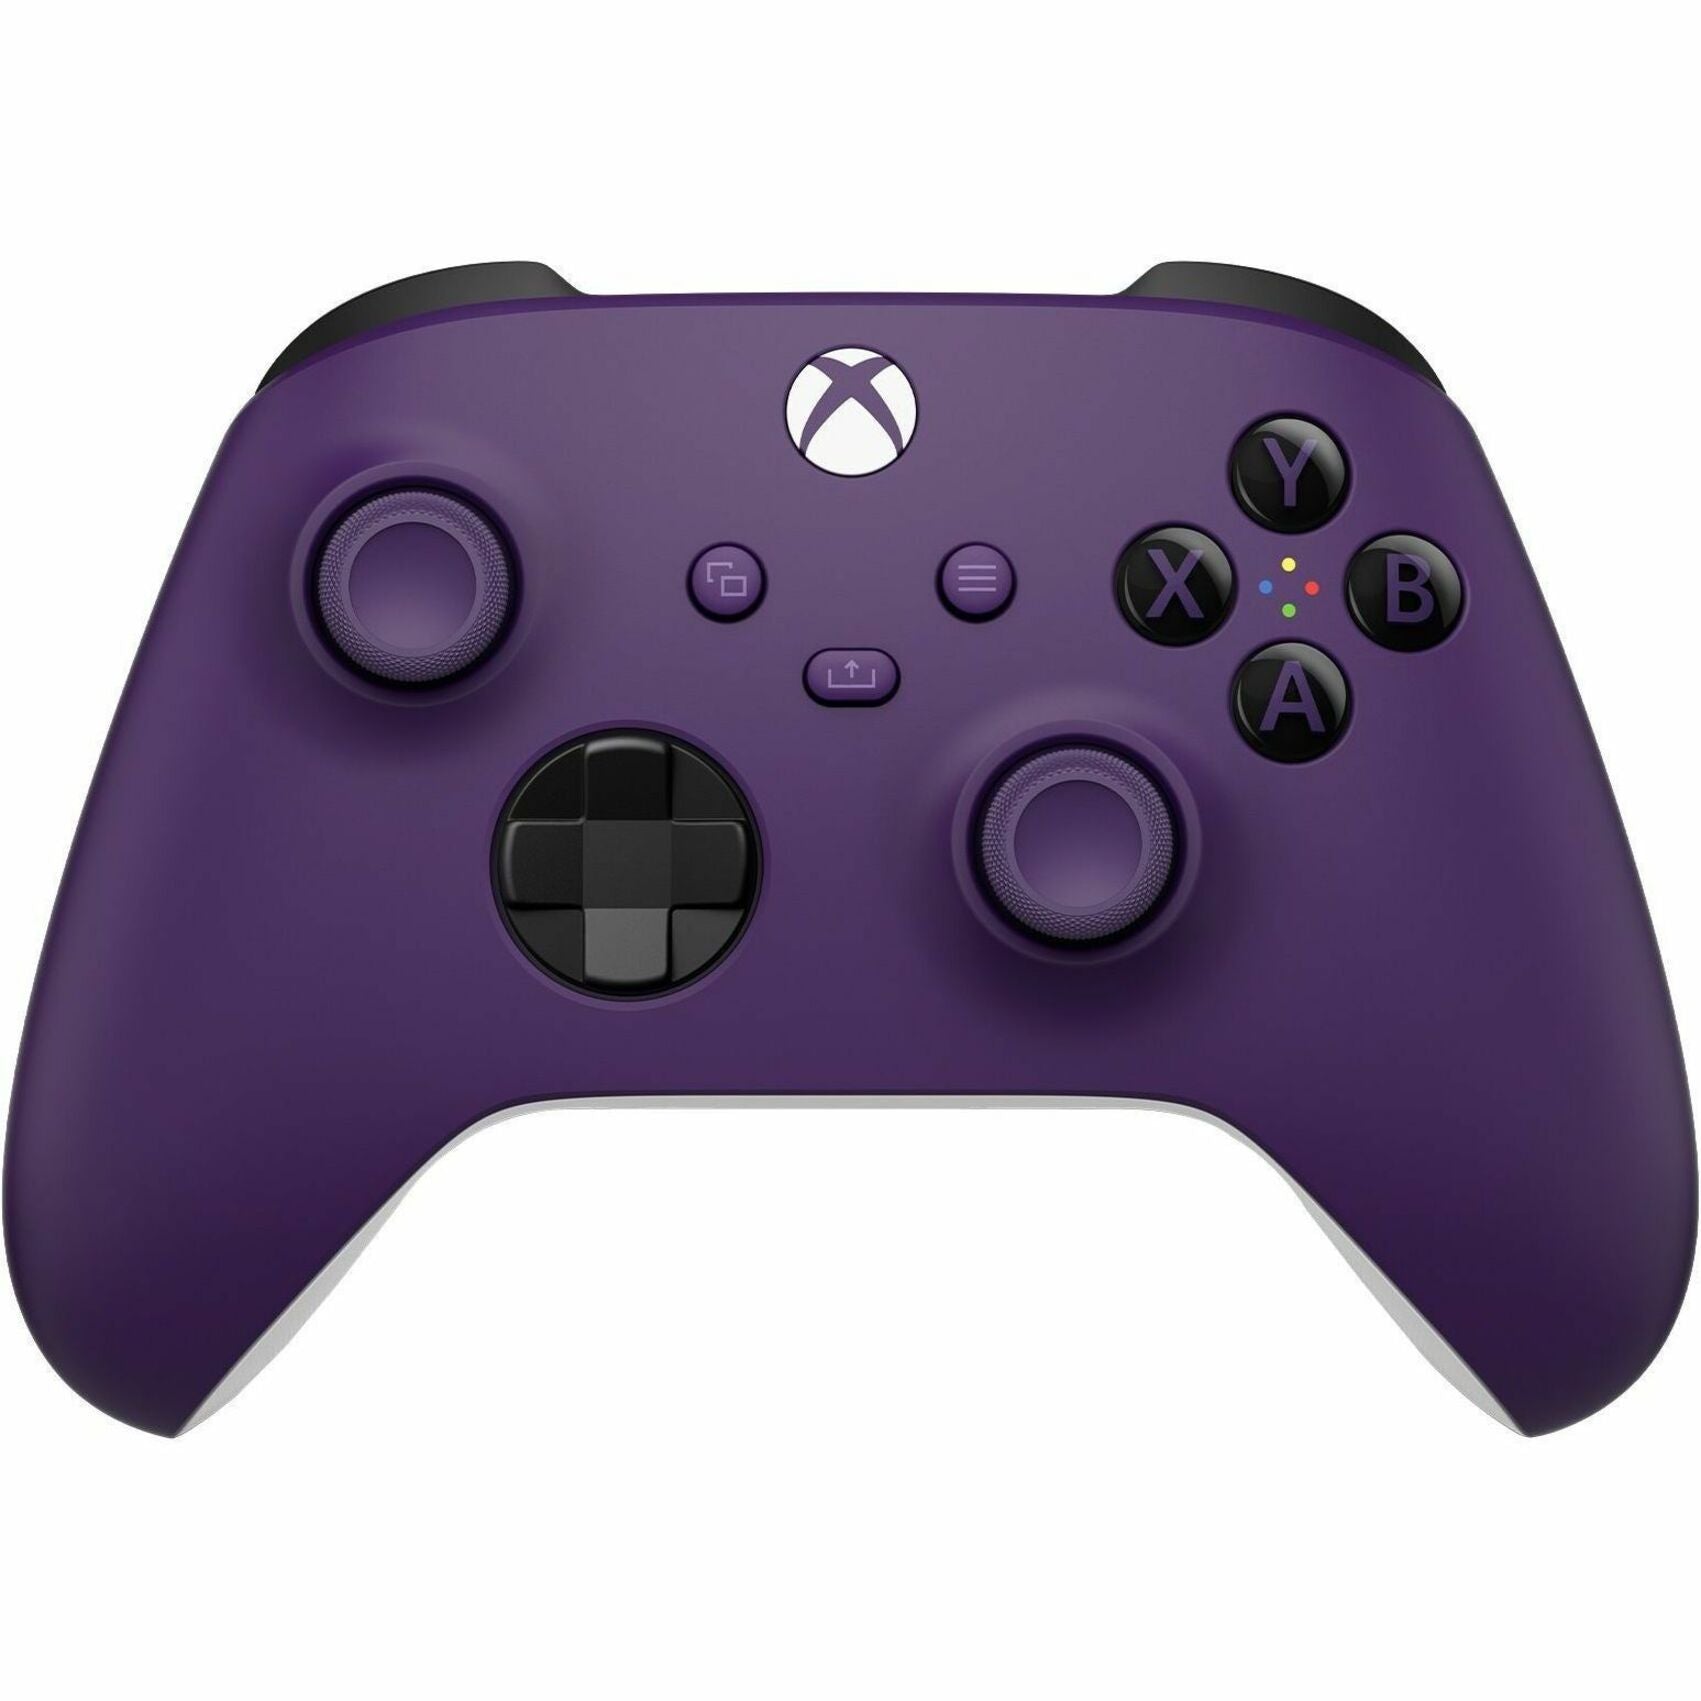 Microsoft QAU-00068 Xbox Wireless Controller, Astral Purple, Textured Triggers And Bumpers, Hybrid D-Pad, Dedicated Share Button